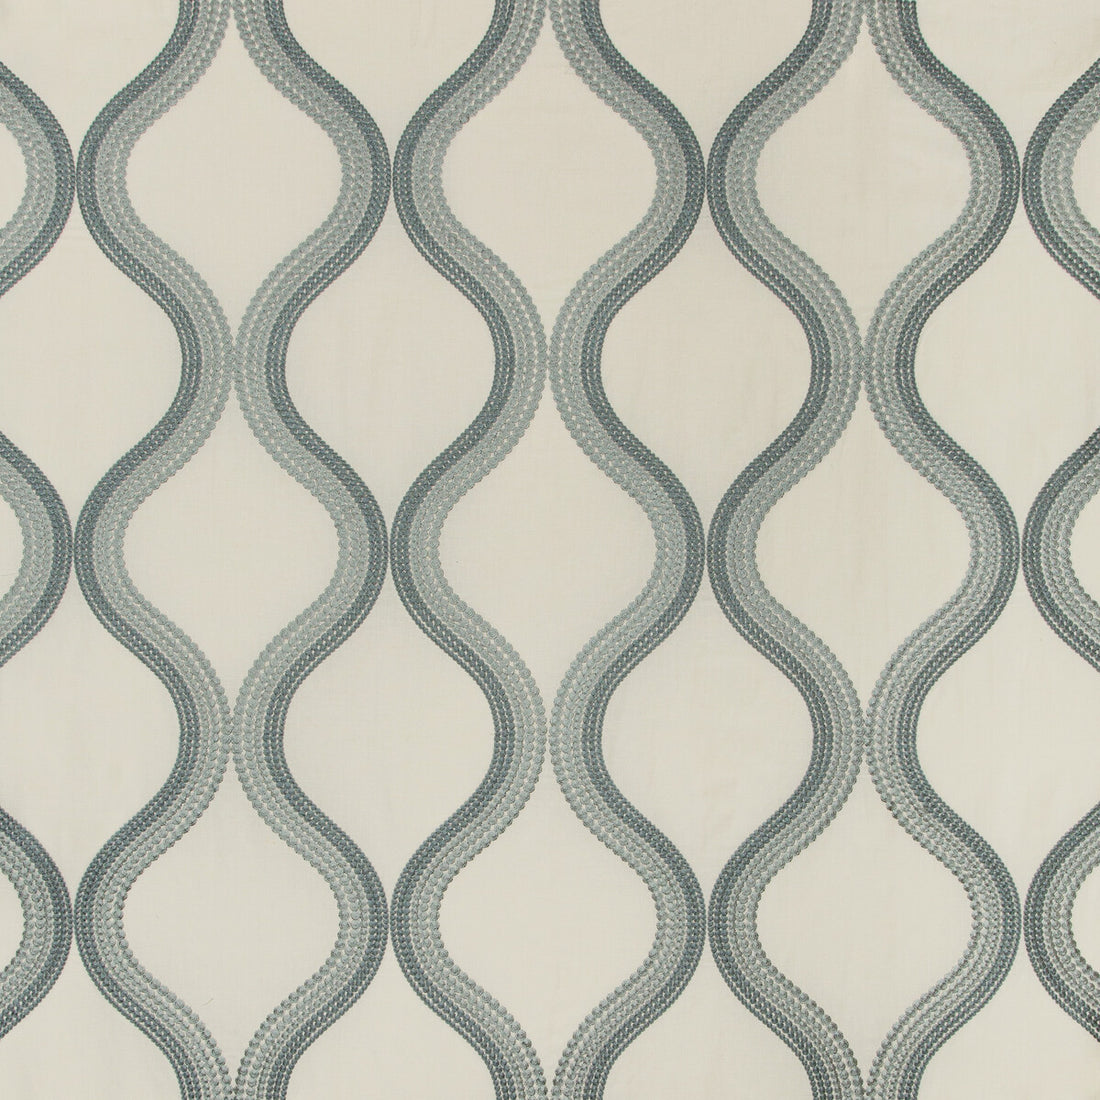 Wandering fabric in skylight color - pattern 35553.15.0 - by Kravet Couture in the Modern Colors-Sojourn Collection collection